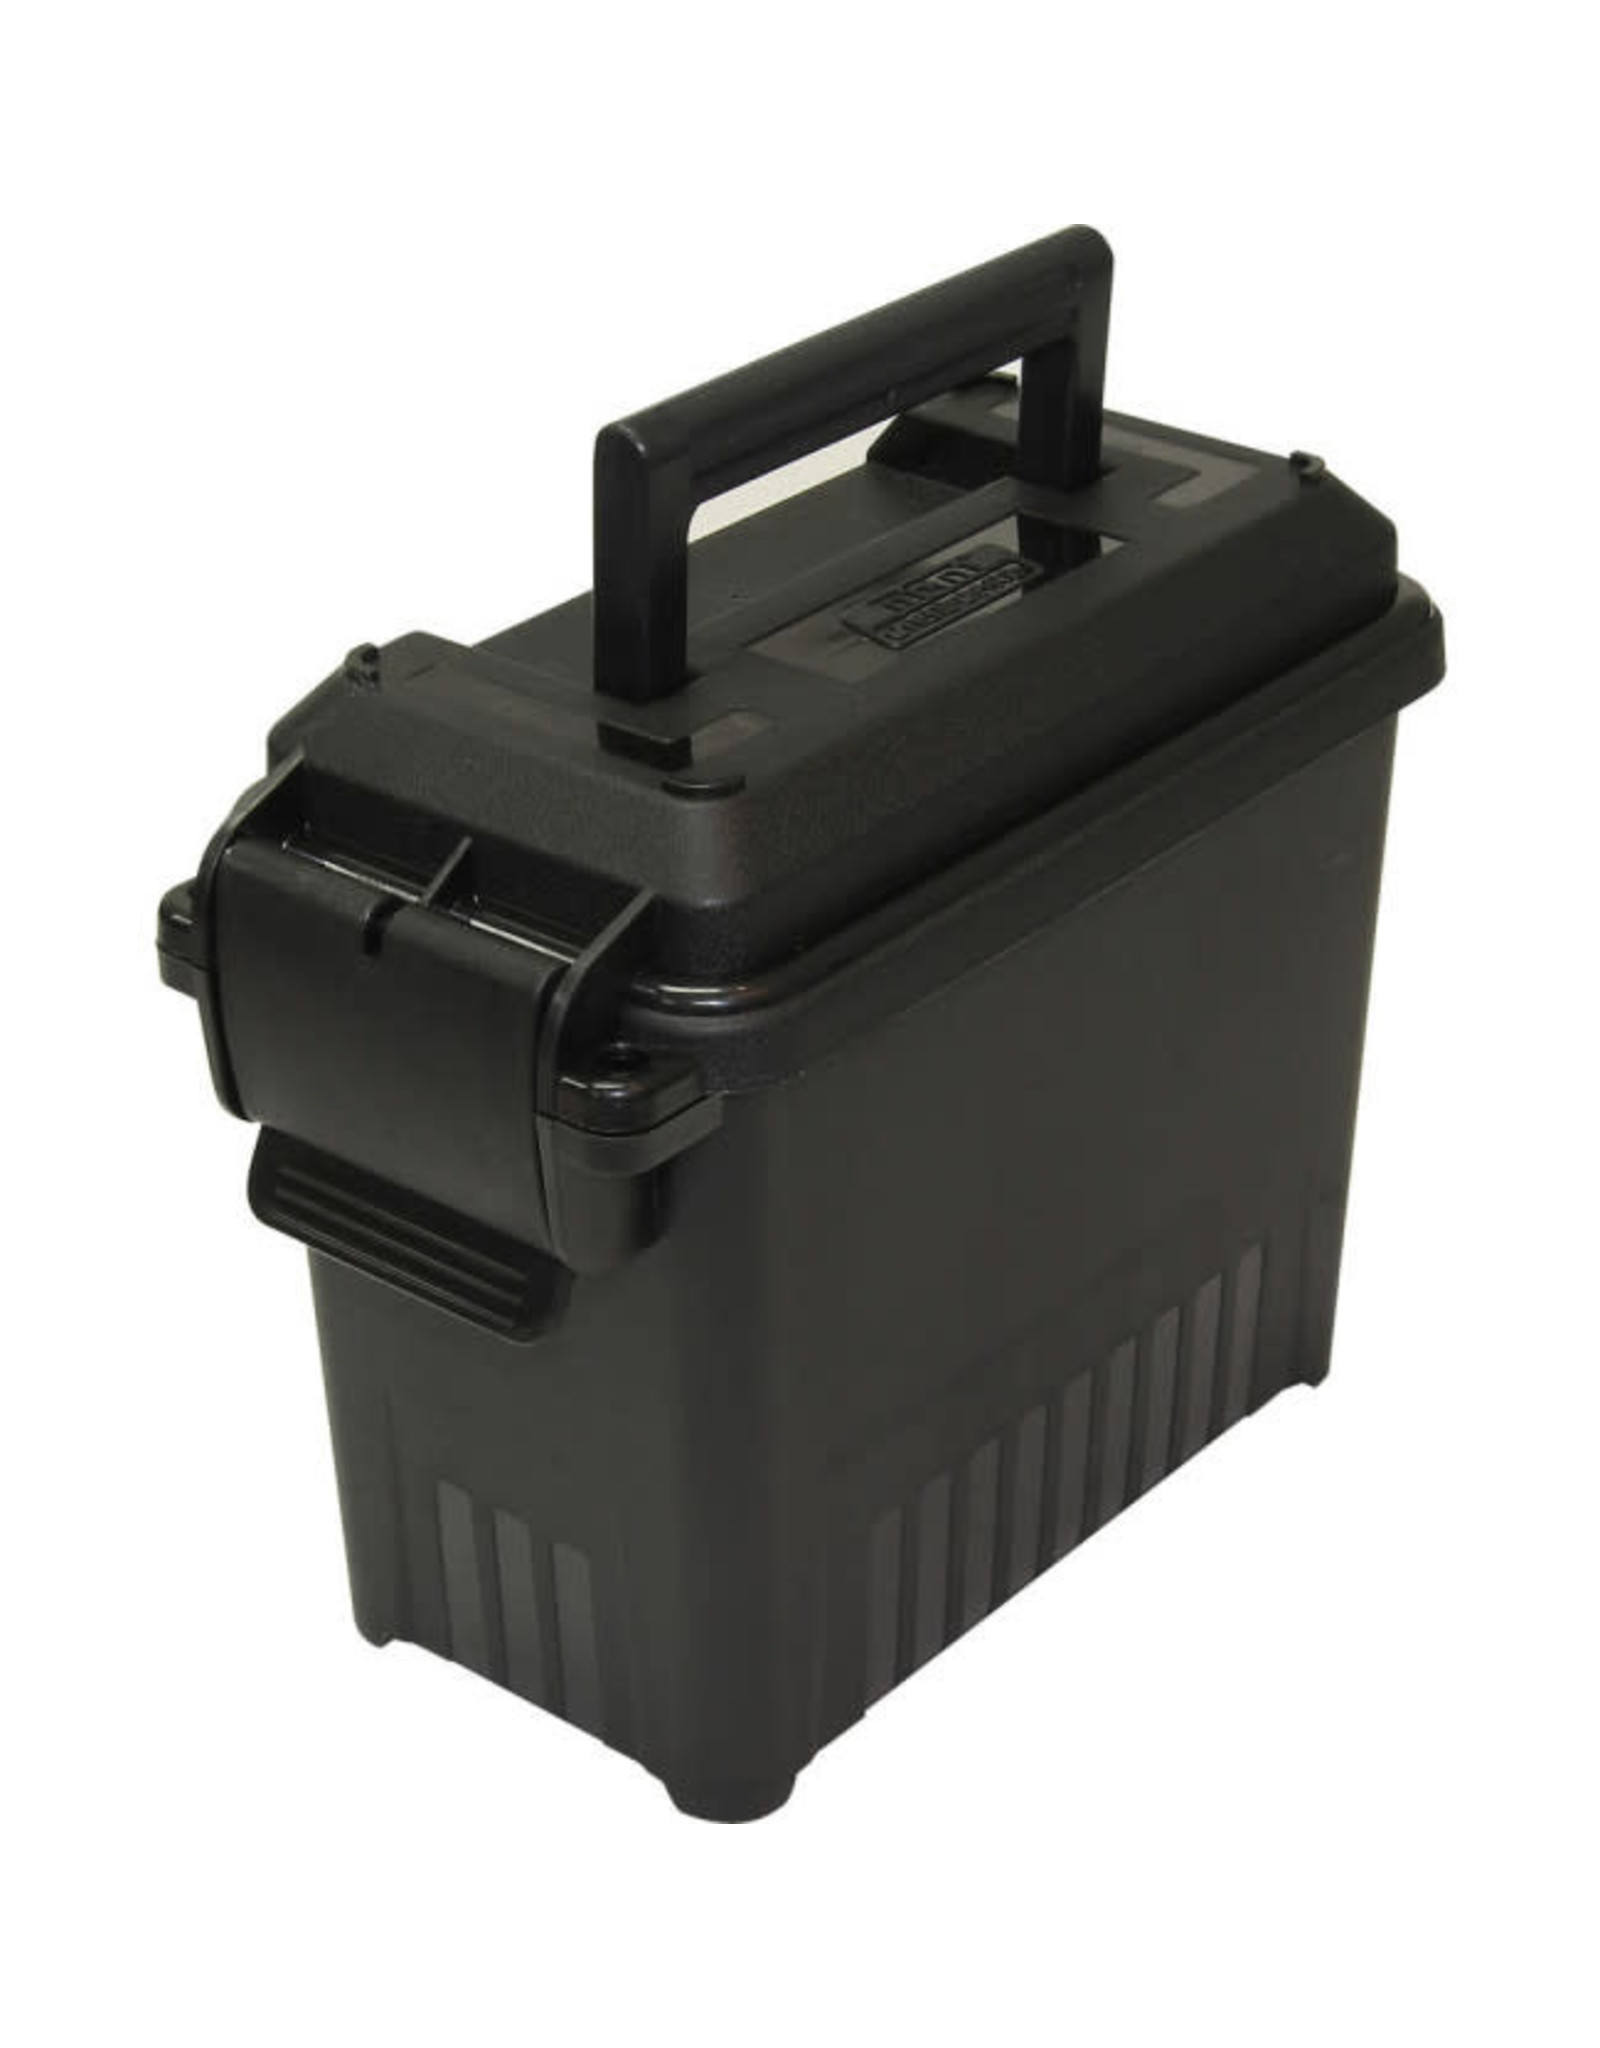 MTM Mini Ammo Can - Larry's Sporting Goods